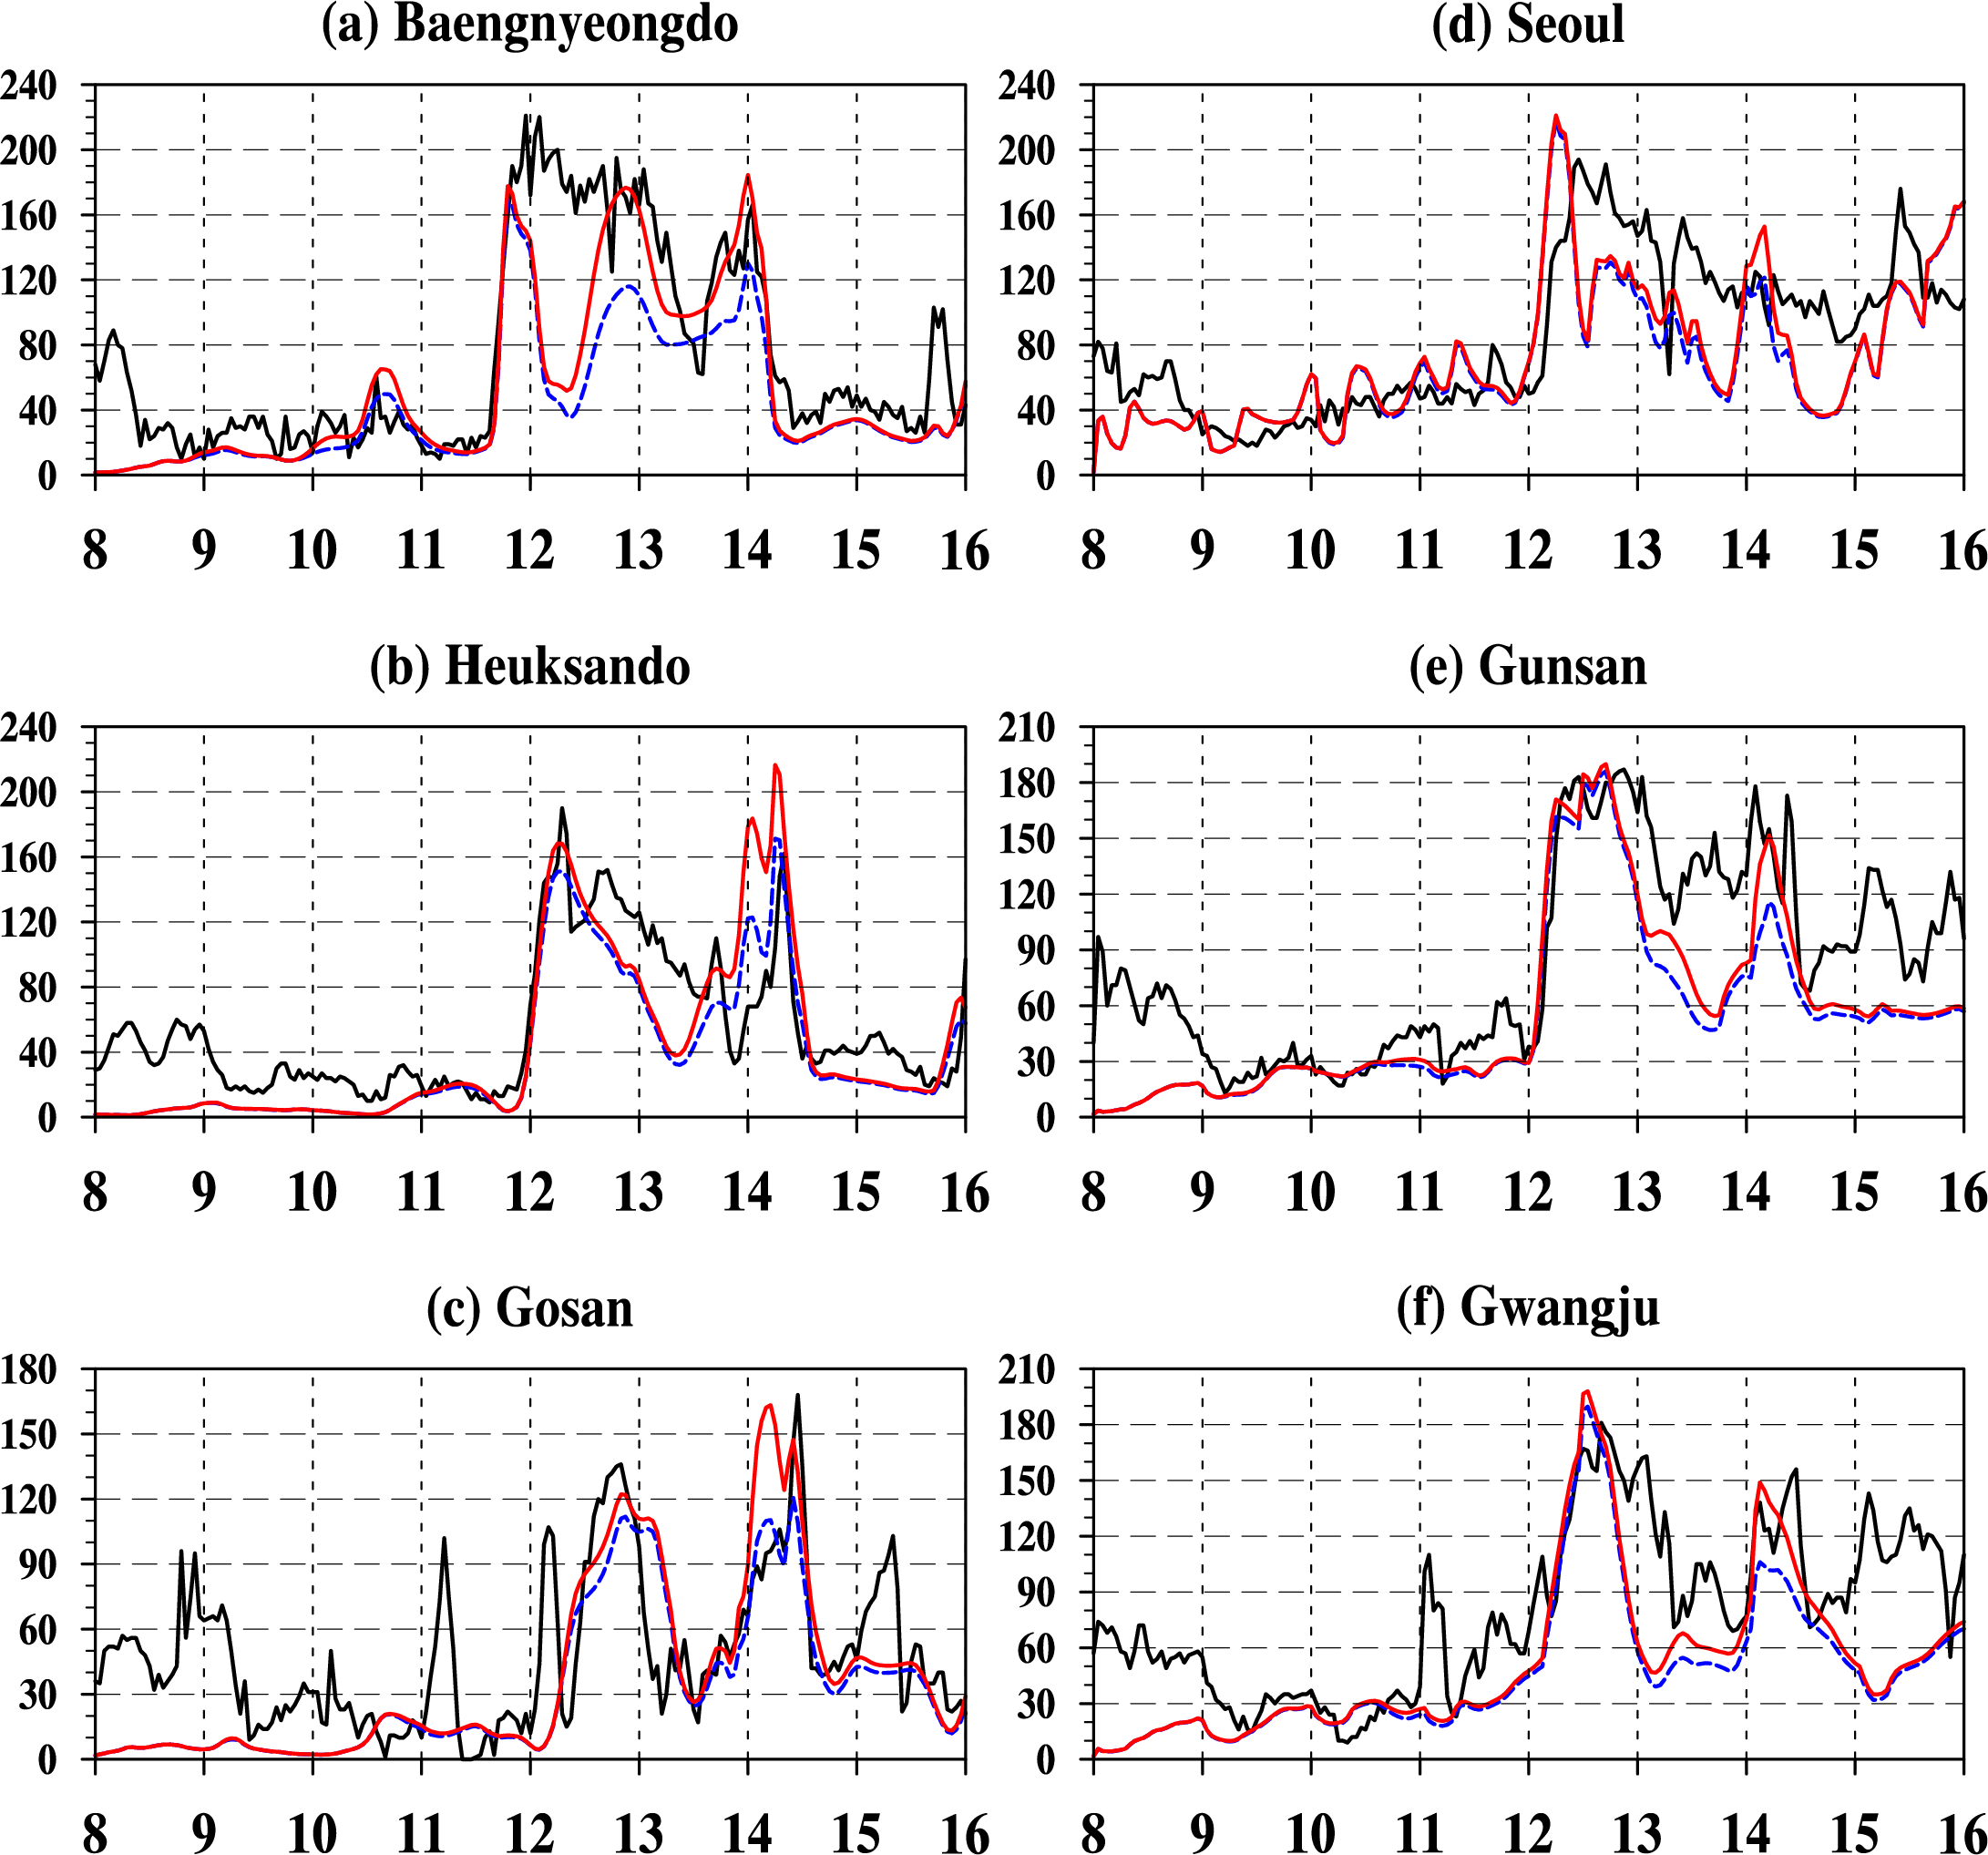 Fig. 3.2.20 The time series of the modeled PM10 concentrations (control run; blue dashed line, modified model run; red solid line) and the observed PM10 concentration (black solid line) at (a) Baengnyeongdo, (b) Heuksando, (c) Gosan, (d) Seoul, (e) Gunsan and (f) Gwangju.